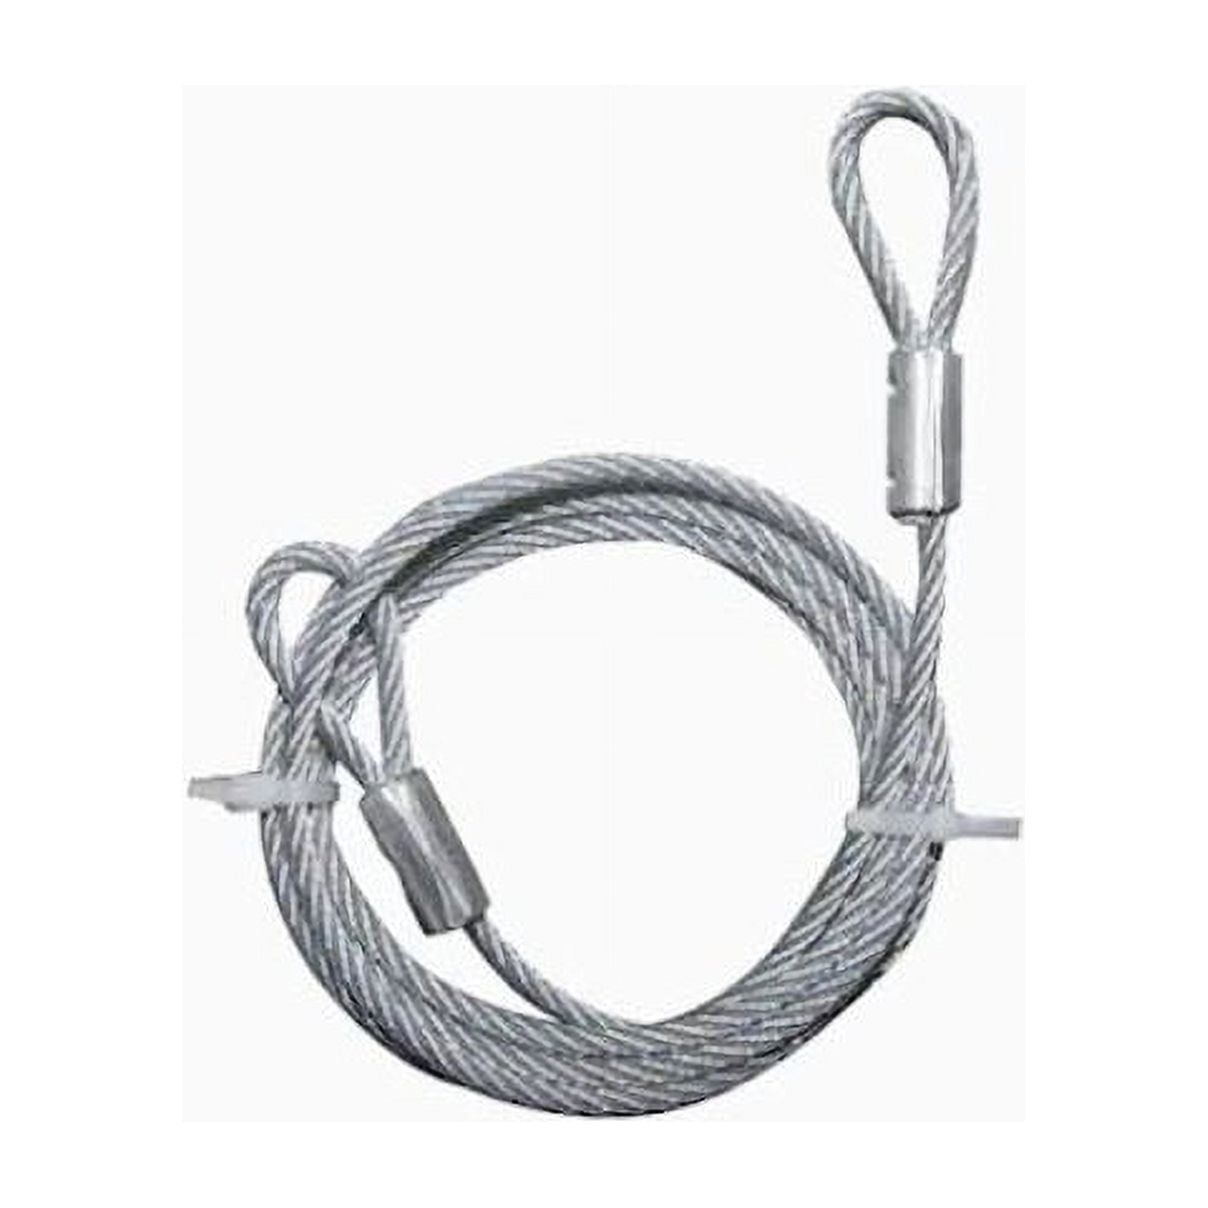 Yoone Outdoor Mountaineering Rock Climbing Rope Clamp Hand Ascender Rappelling  Gear 